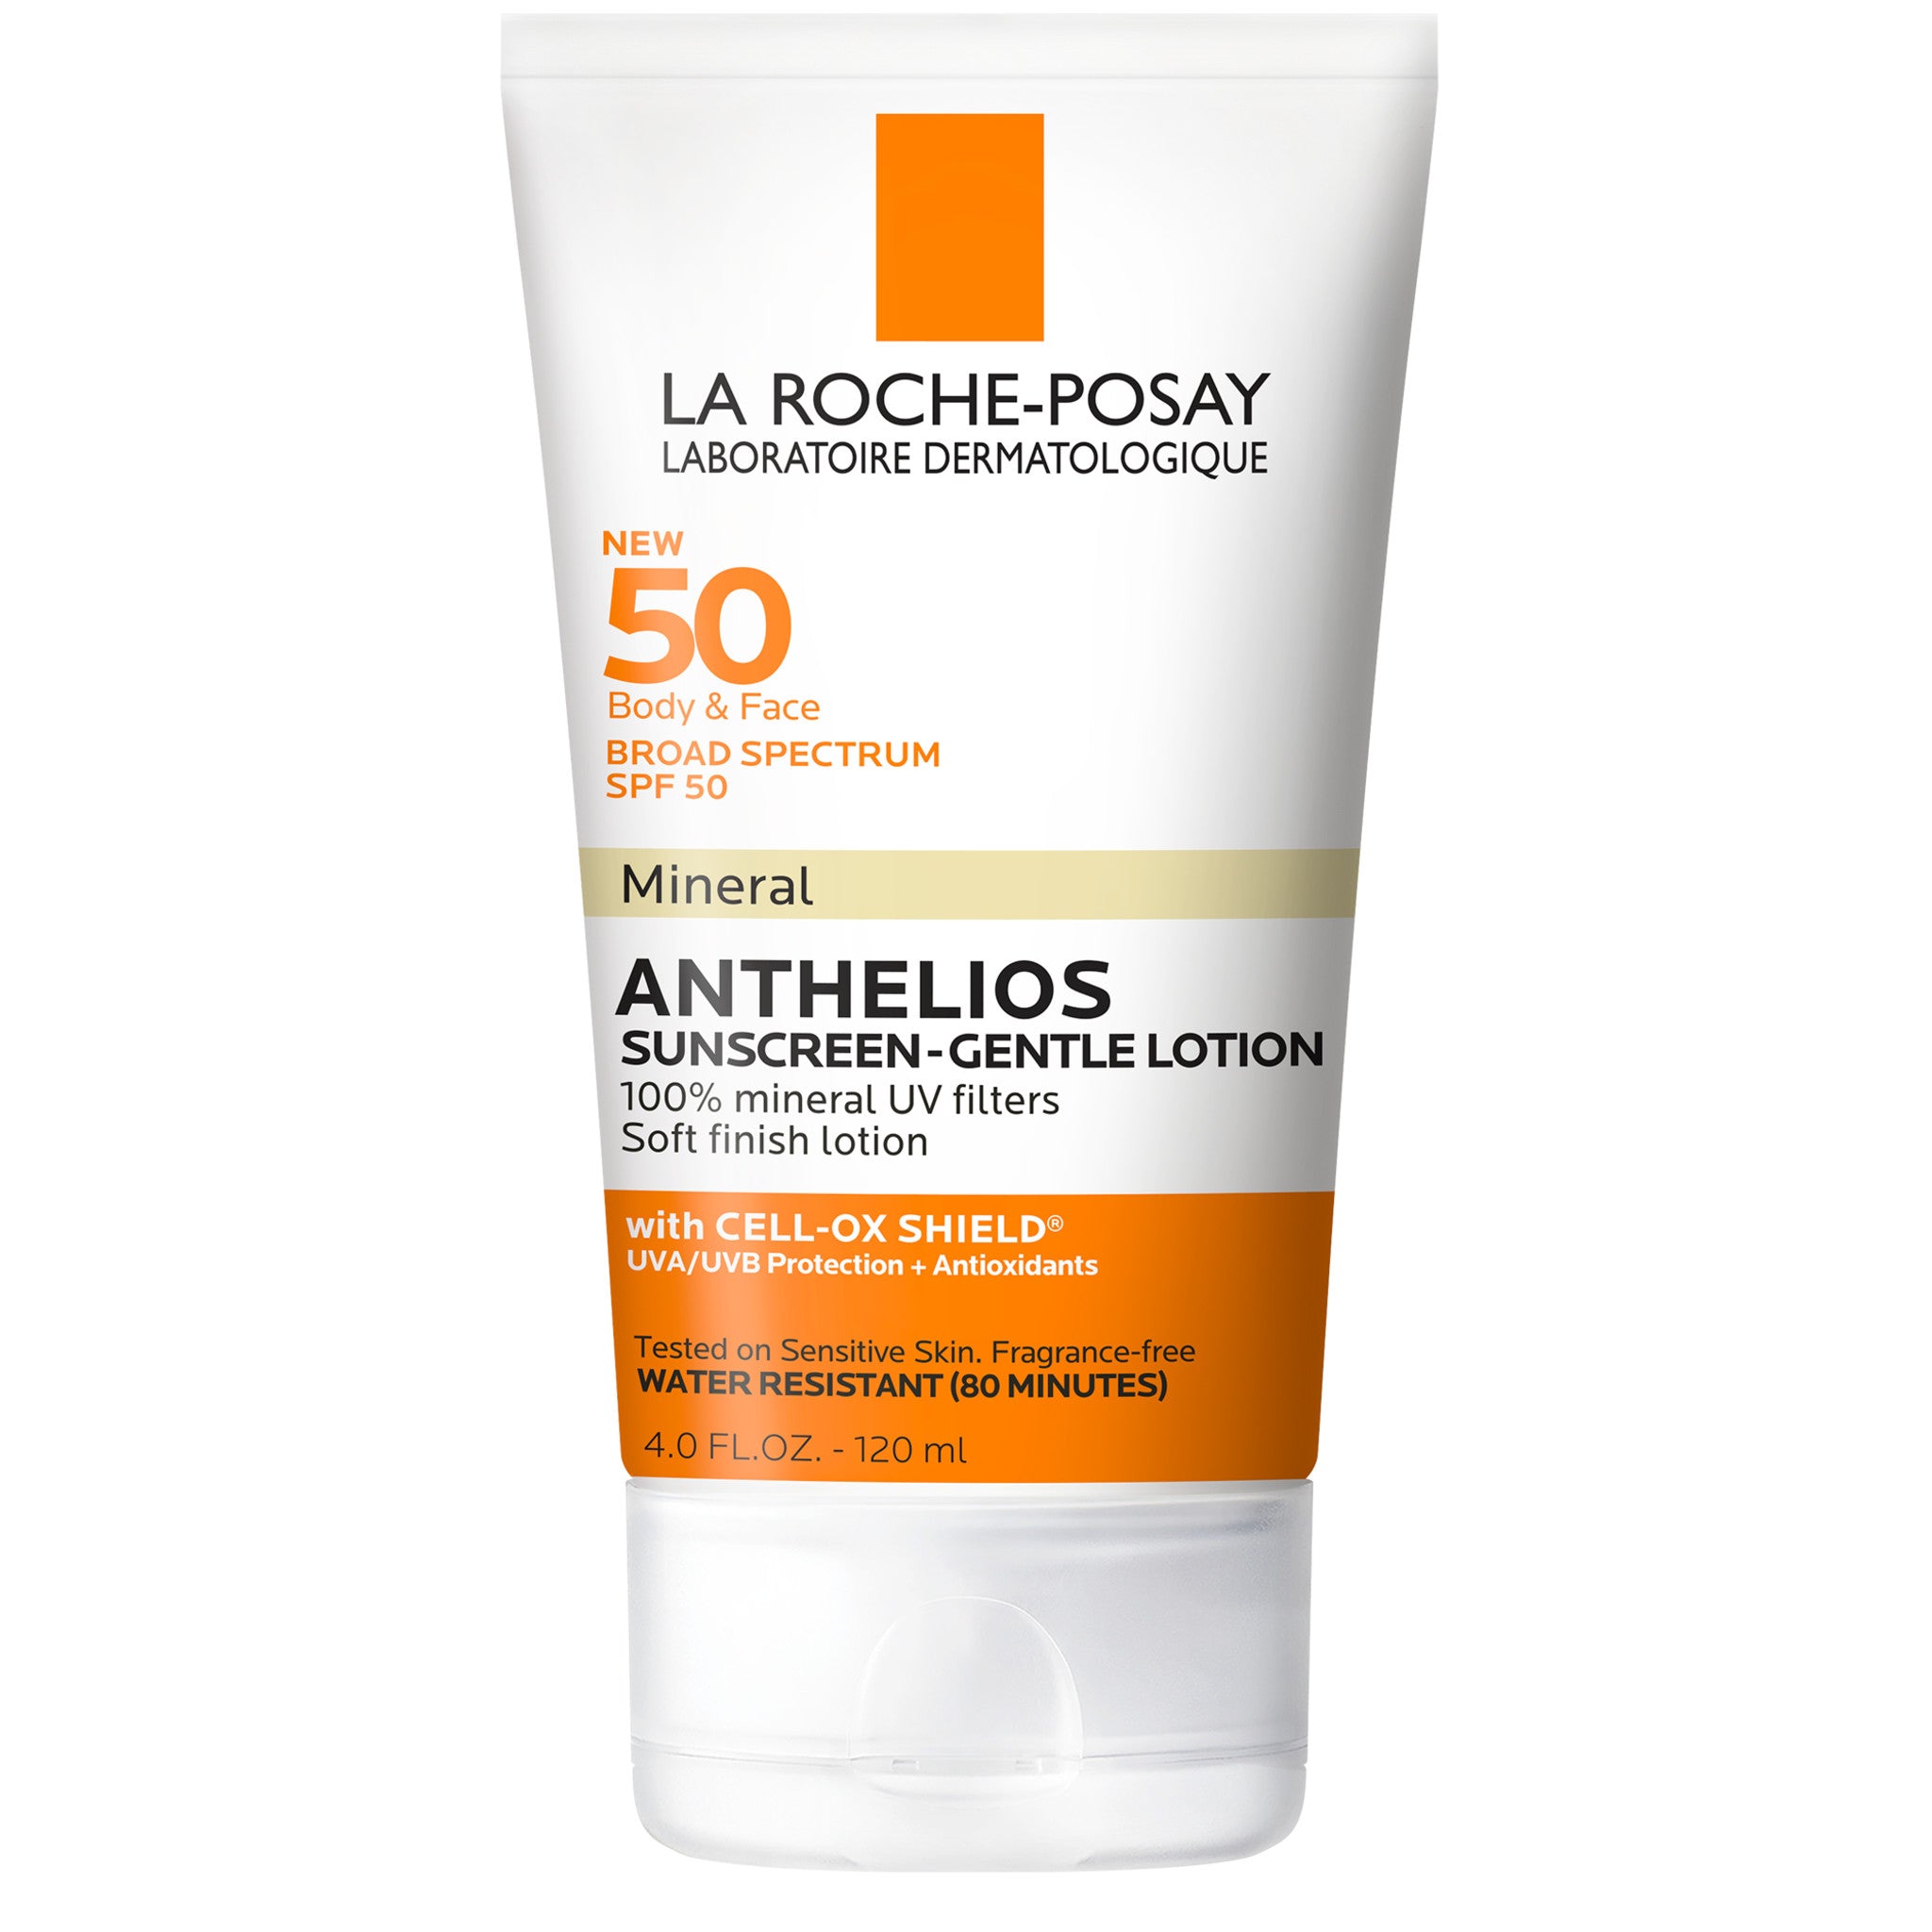 La Roche-Posay Anthelios Gentle Mineral Sunscreen Lotion SPF 50 Size variant: 4 fl oz